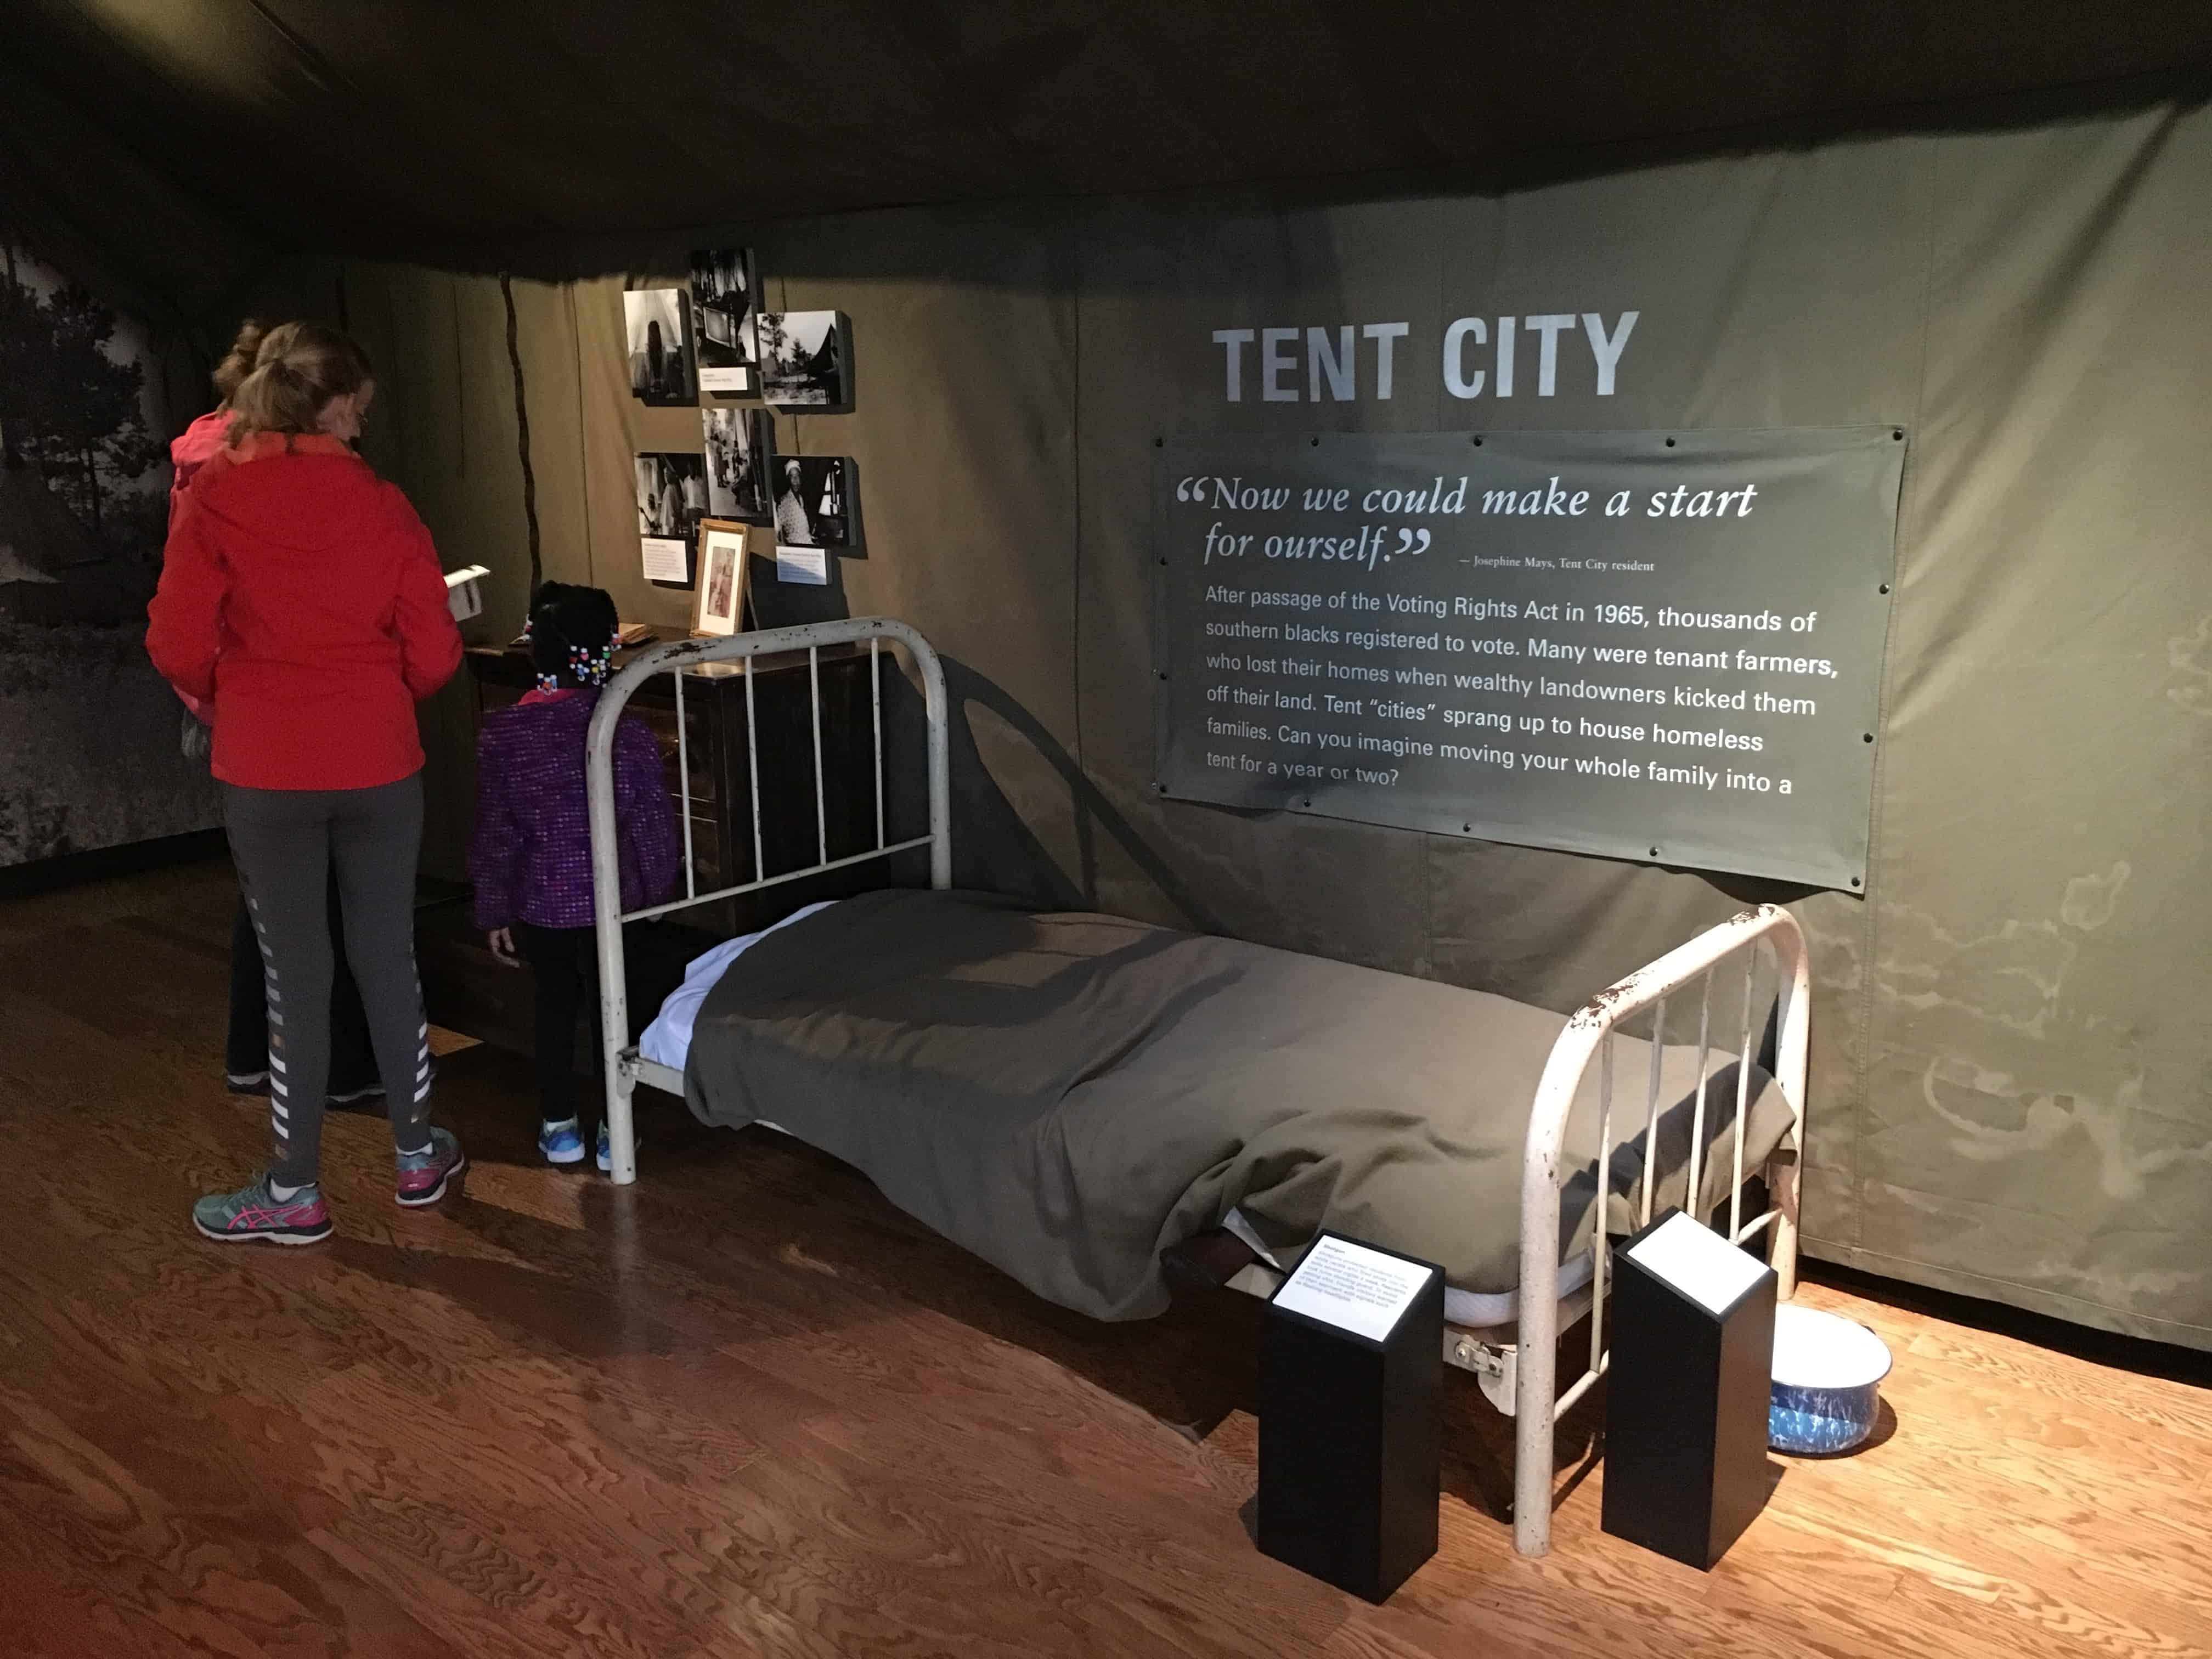 Tent city exhibit at the Lowndes Interpretive Center on the Selma to Montgomery National Historic Trail in Alabama